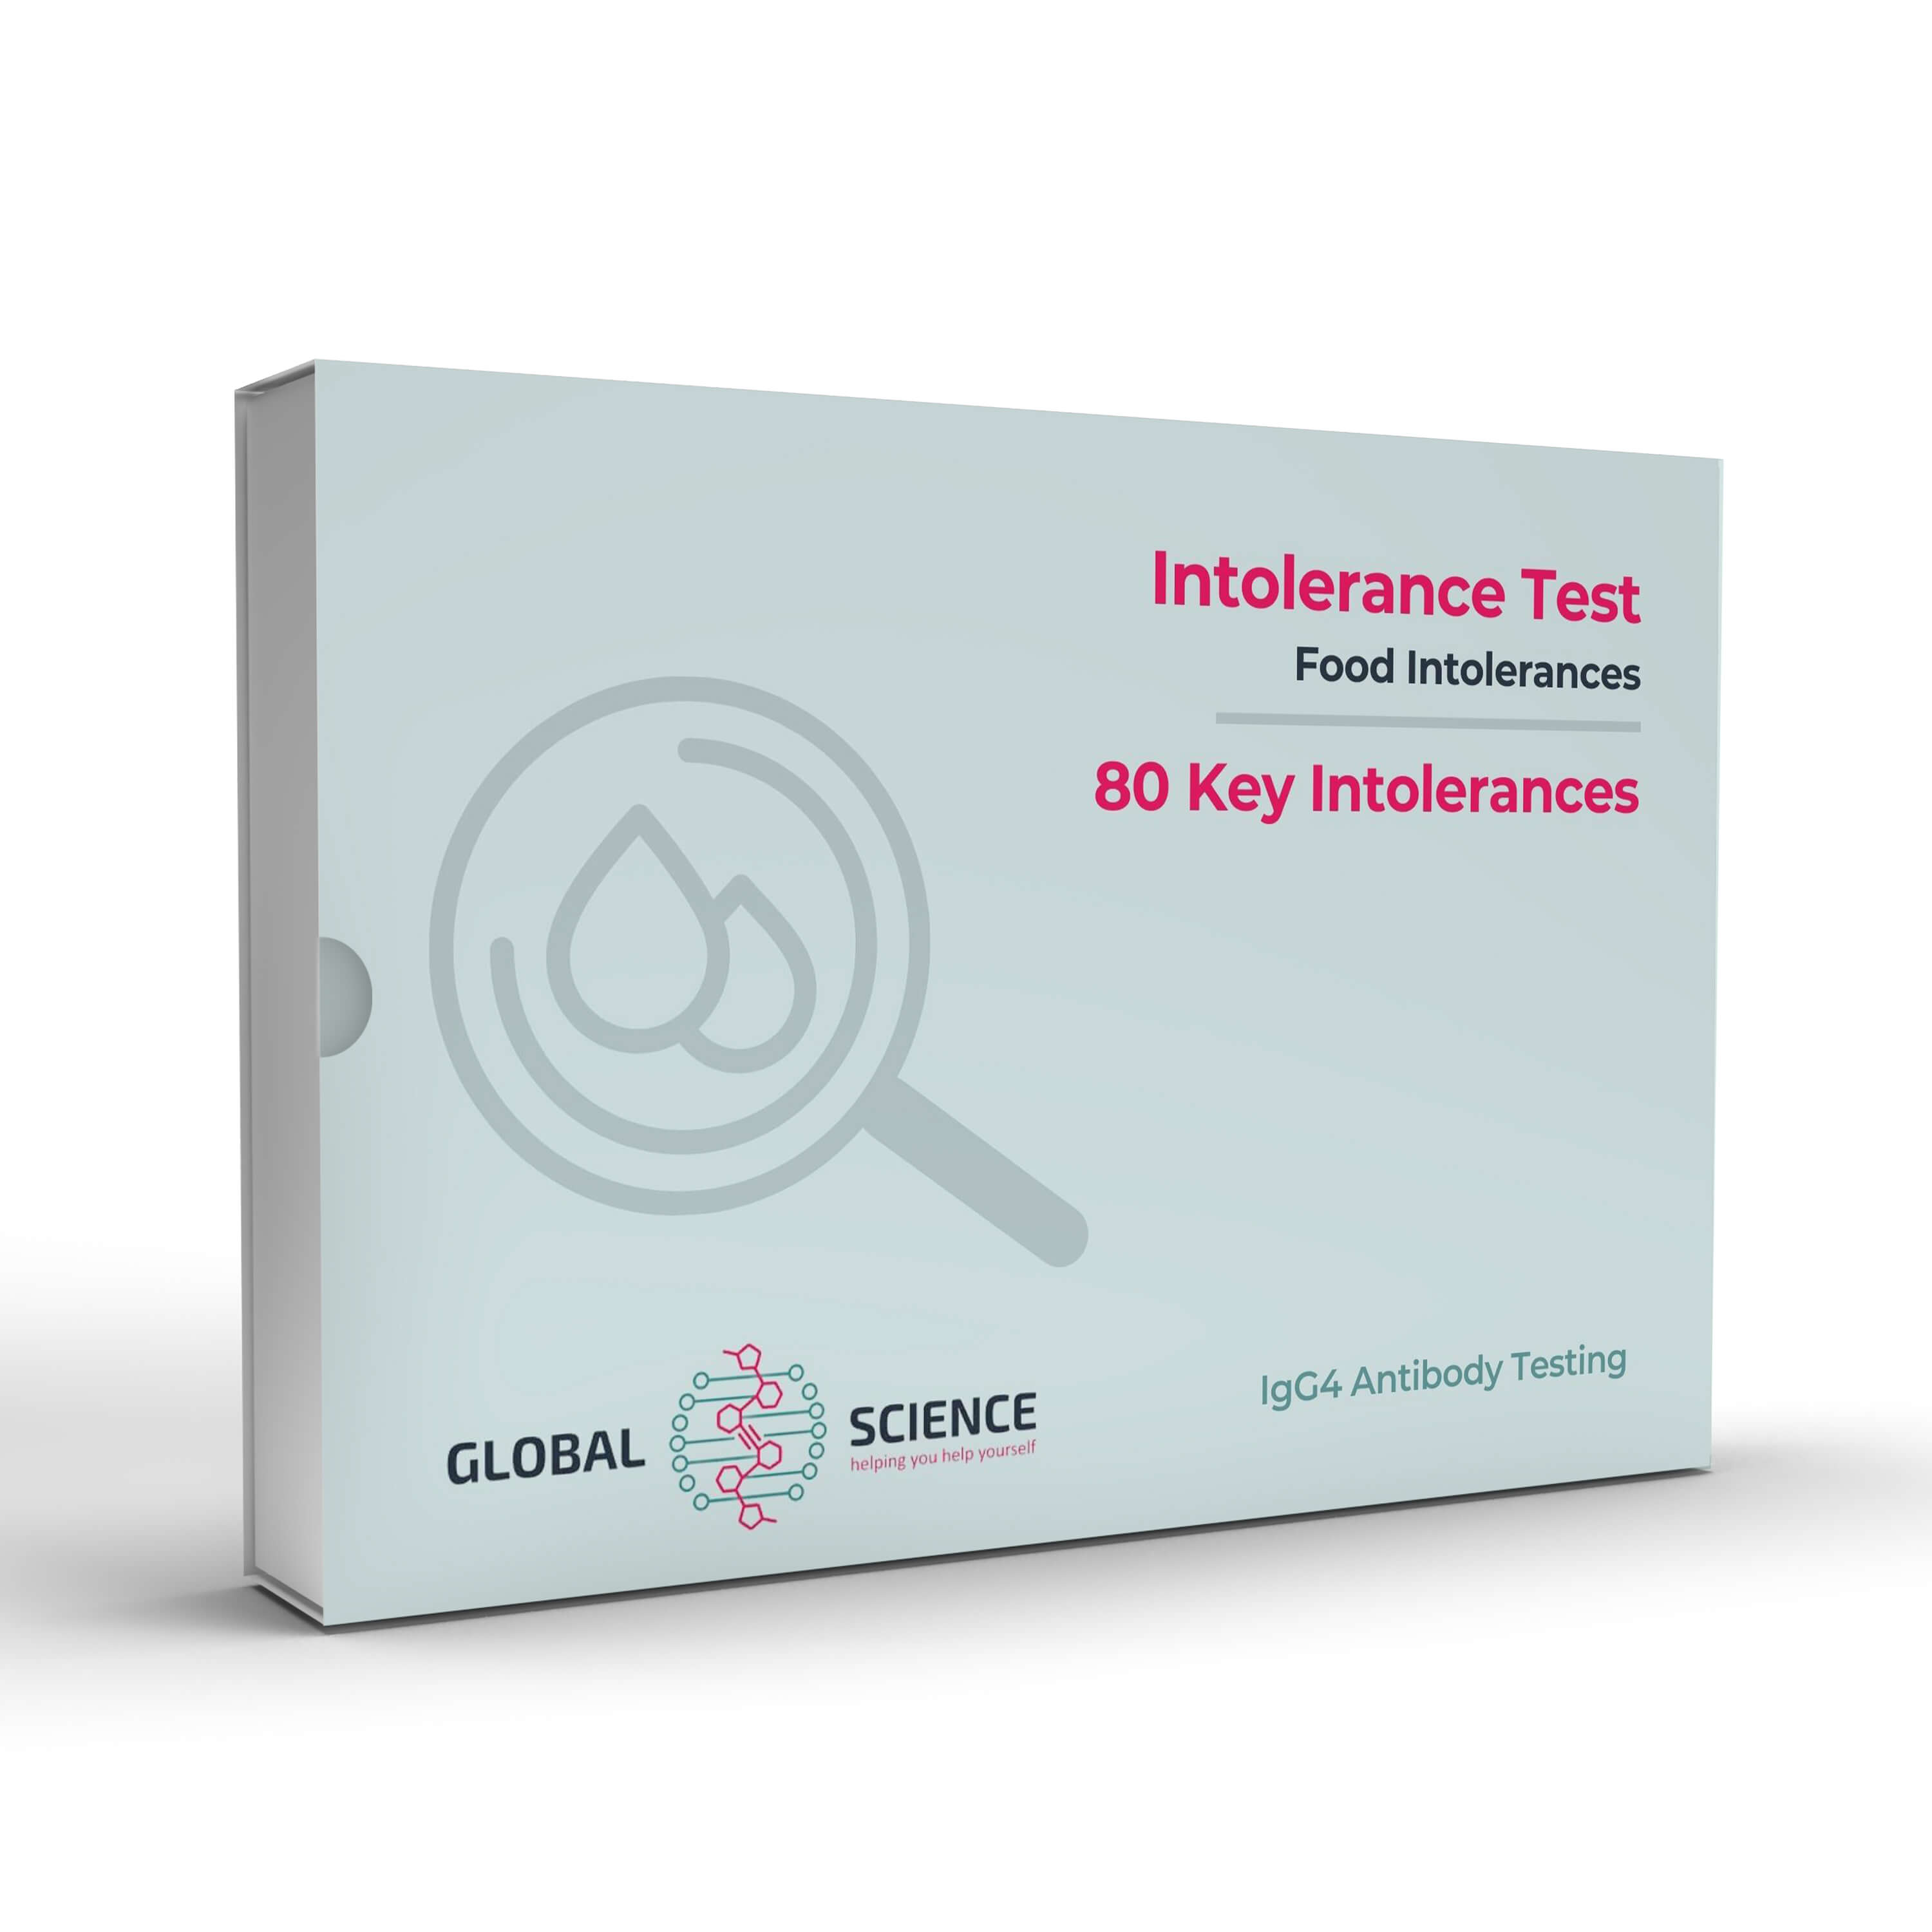 Intolerance 80 Kit Mock up - Allergy, Intolerance and Bioresonance Testing Labs